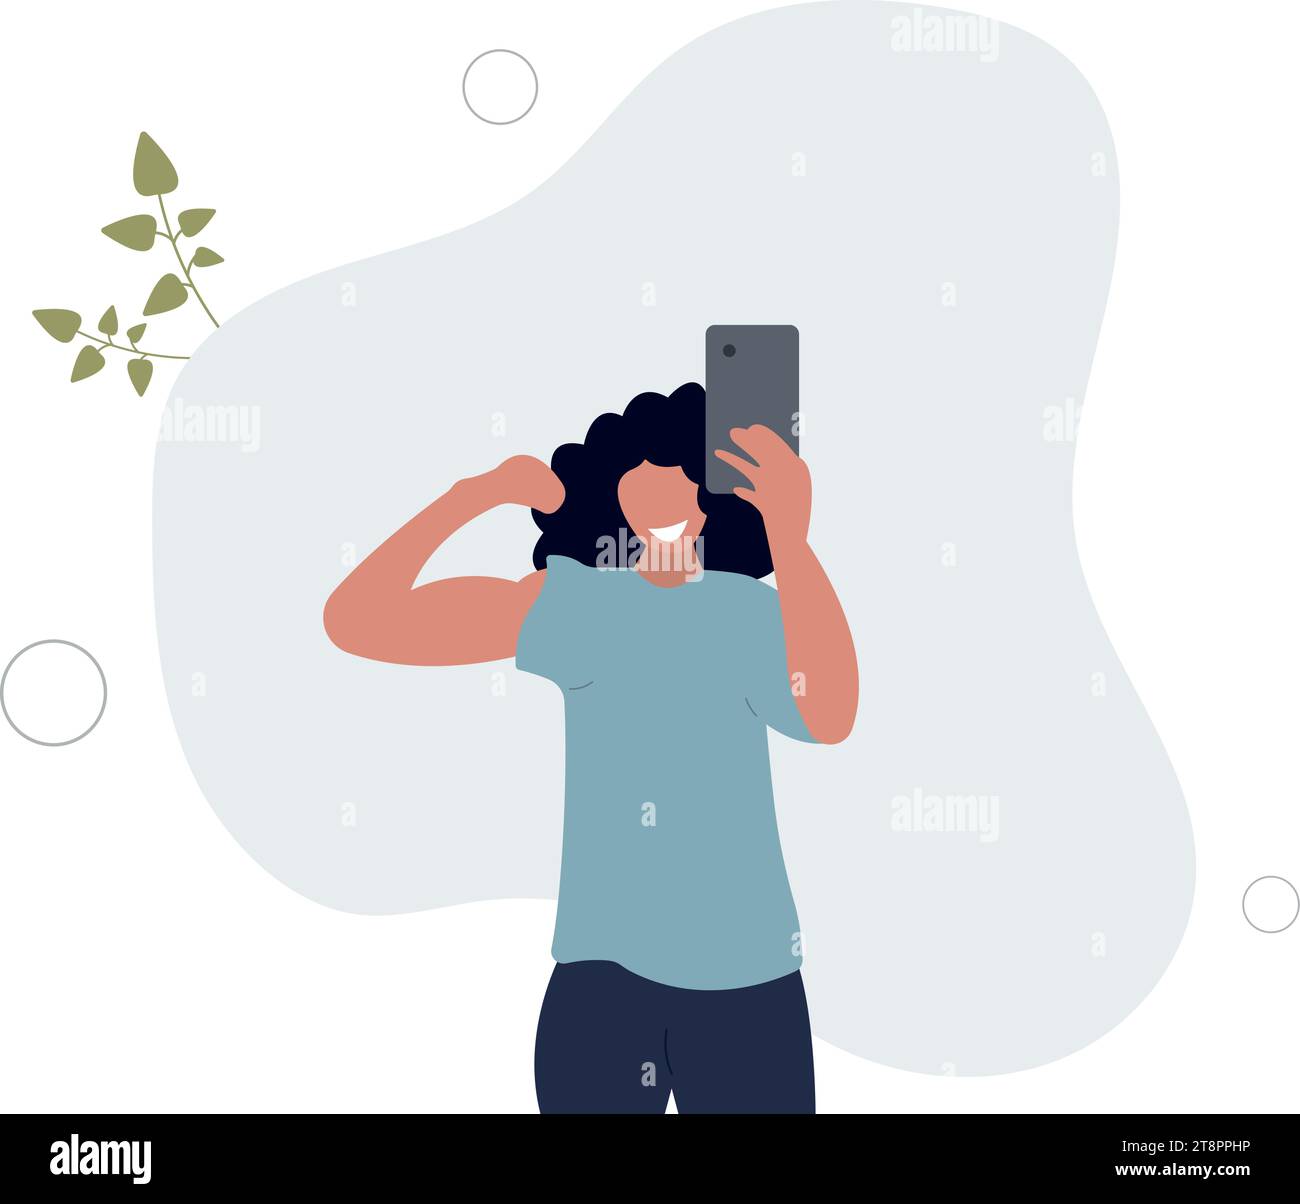 girl after training takes a selfie, healthy lifestyle and fitness conceptflat vector illustration. Stock Vector